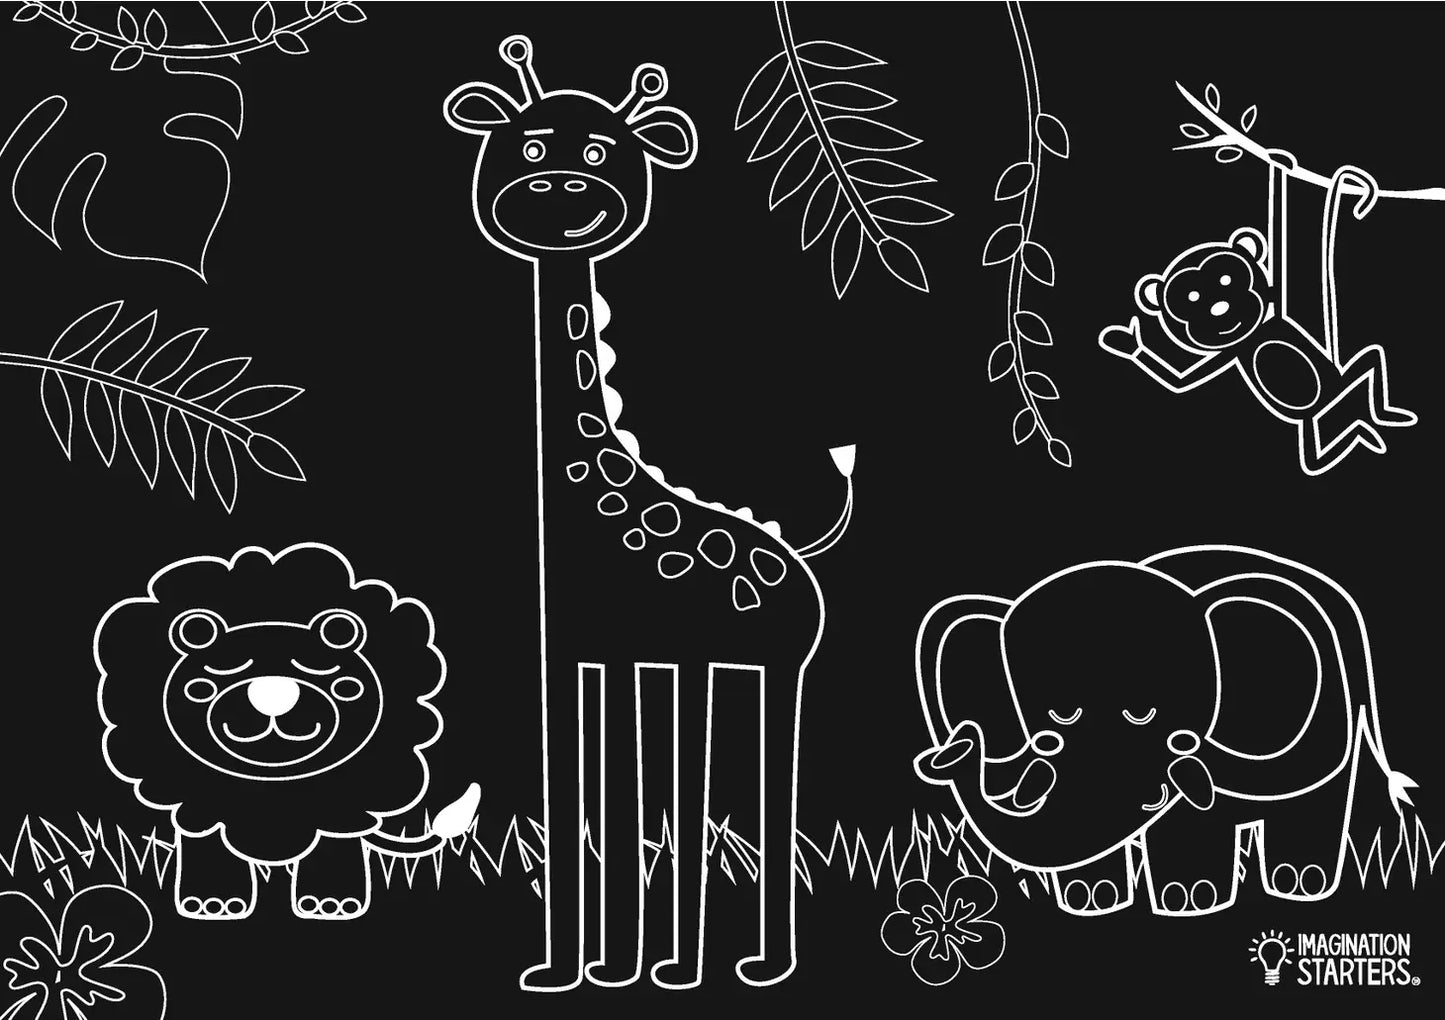 Farm and Jungle Chalkboard Placemat Set